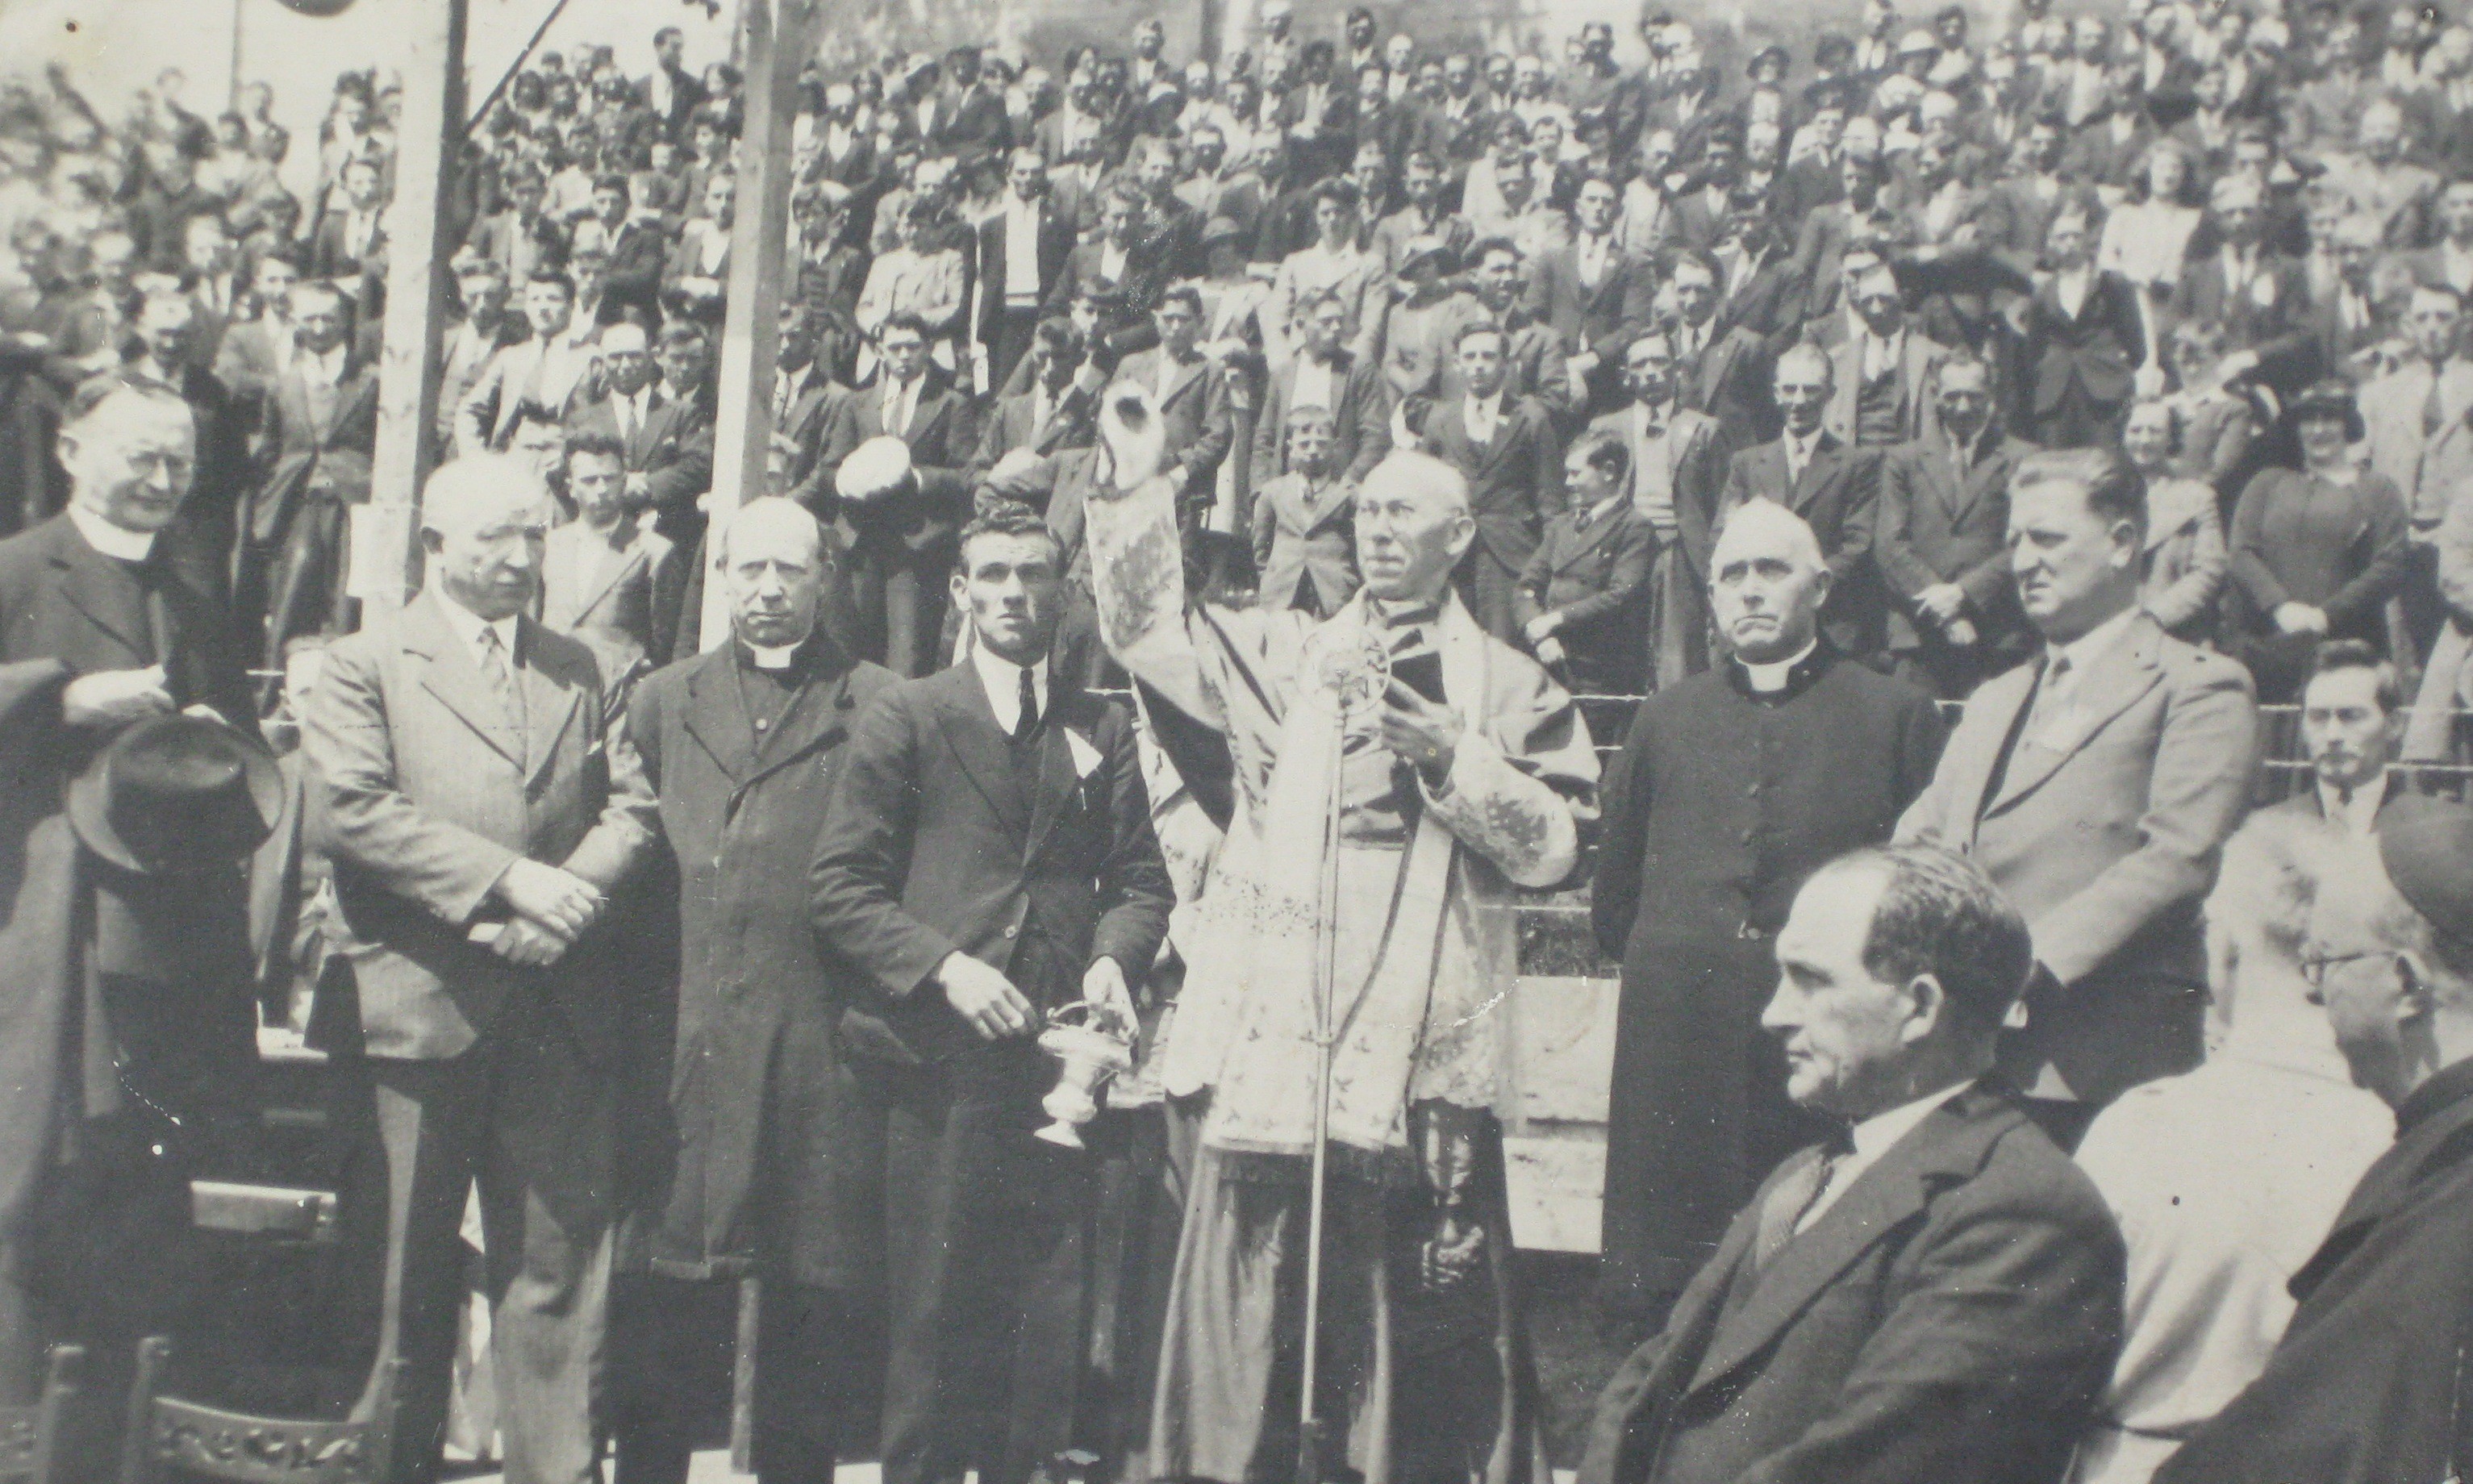 The opening of Fitzgerald Stadium, Killarney, in 1936 illustrated the close links between the Catholic Church and the GAA. The ground was first blessed by Dr O'Brien, Bishop of Kerry, then officially opened by Archbishop Harty, Patron of the GAA.